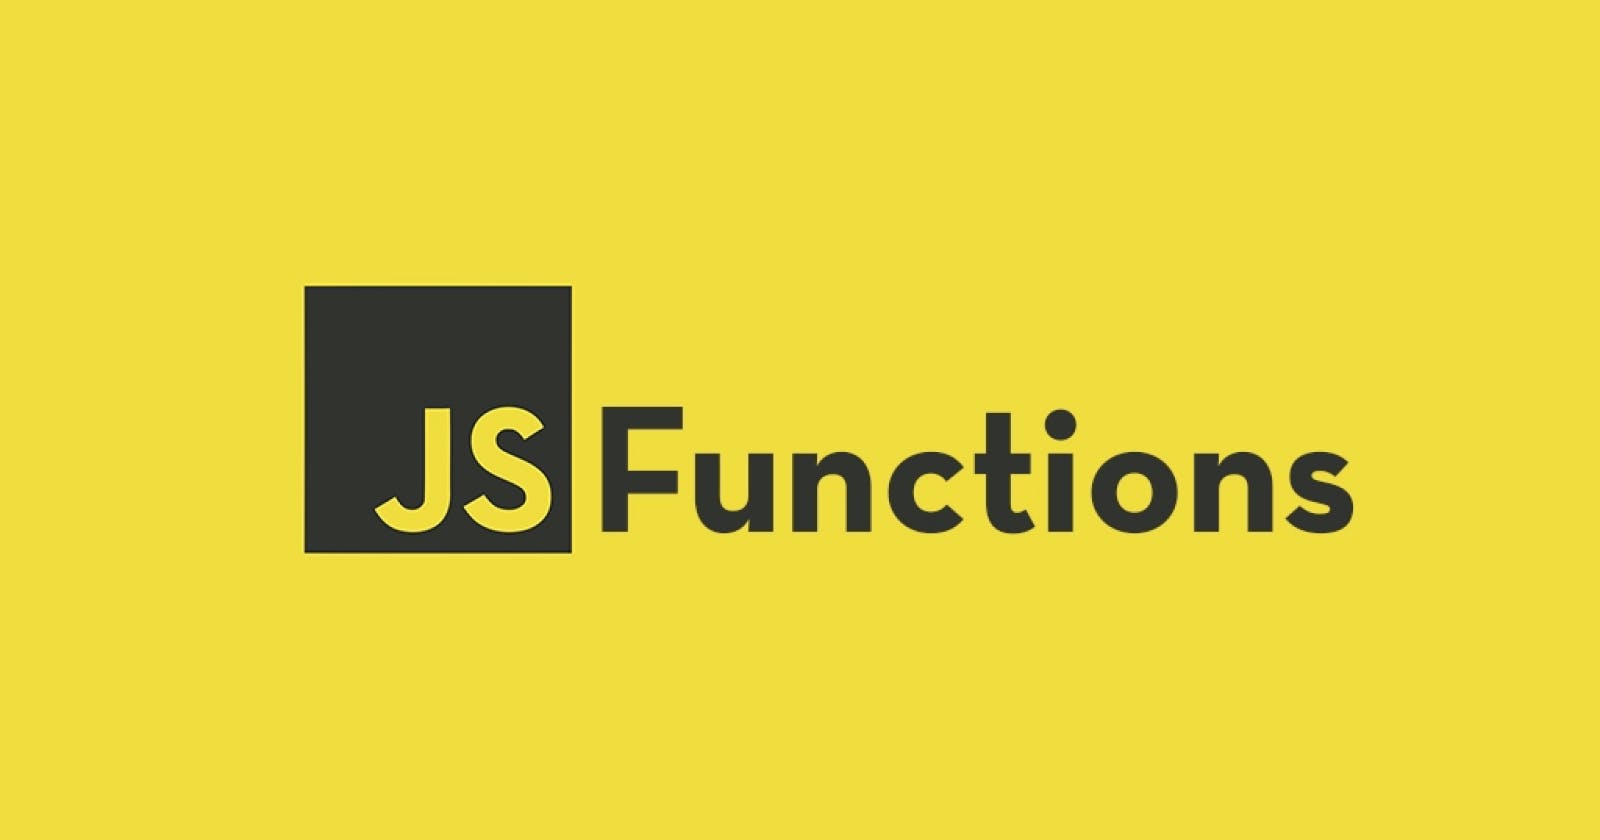 Quick Guide to JavaScript Functions